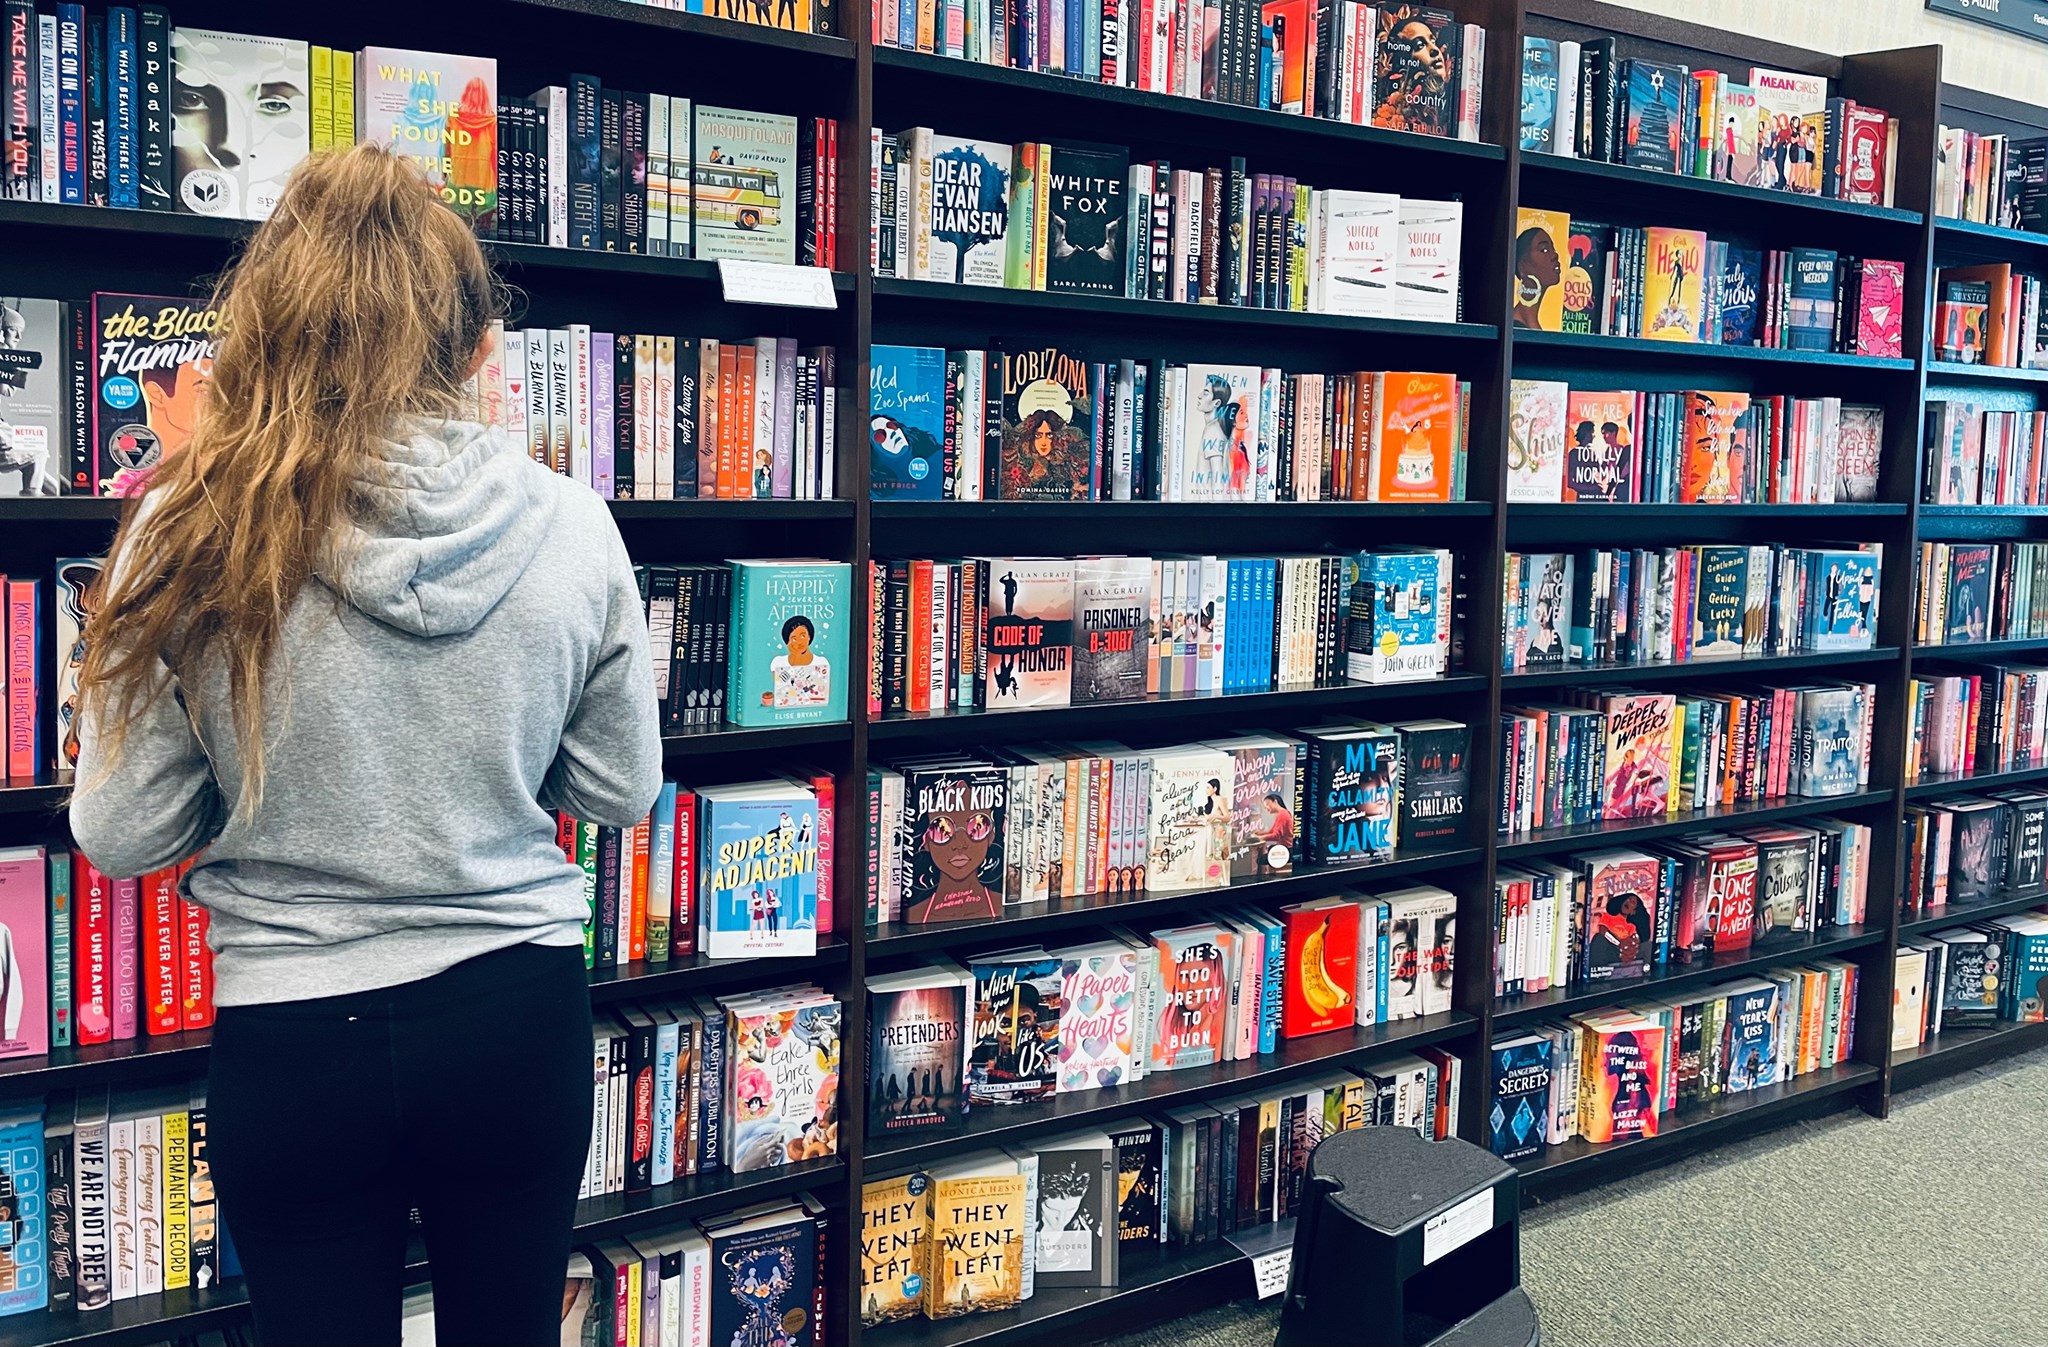 New Reports Show a Decline in YA Book Sales and I Have Some Thoughts as to Why That Might be Happening